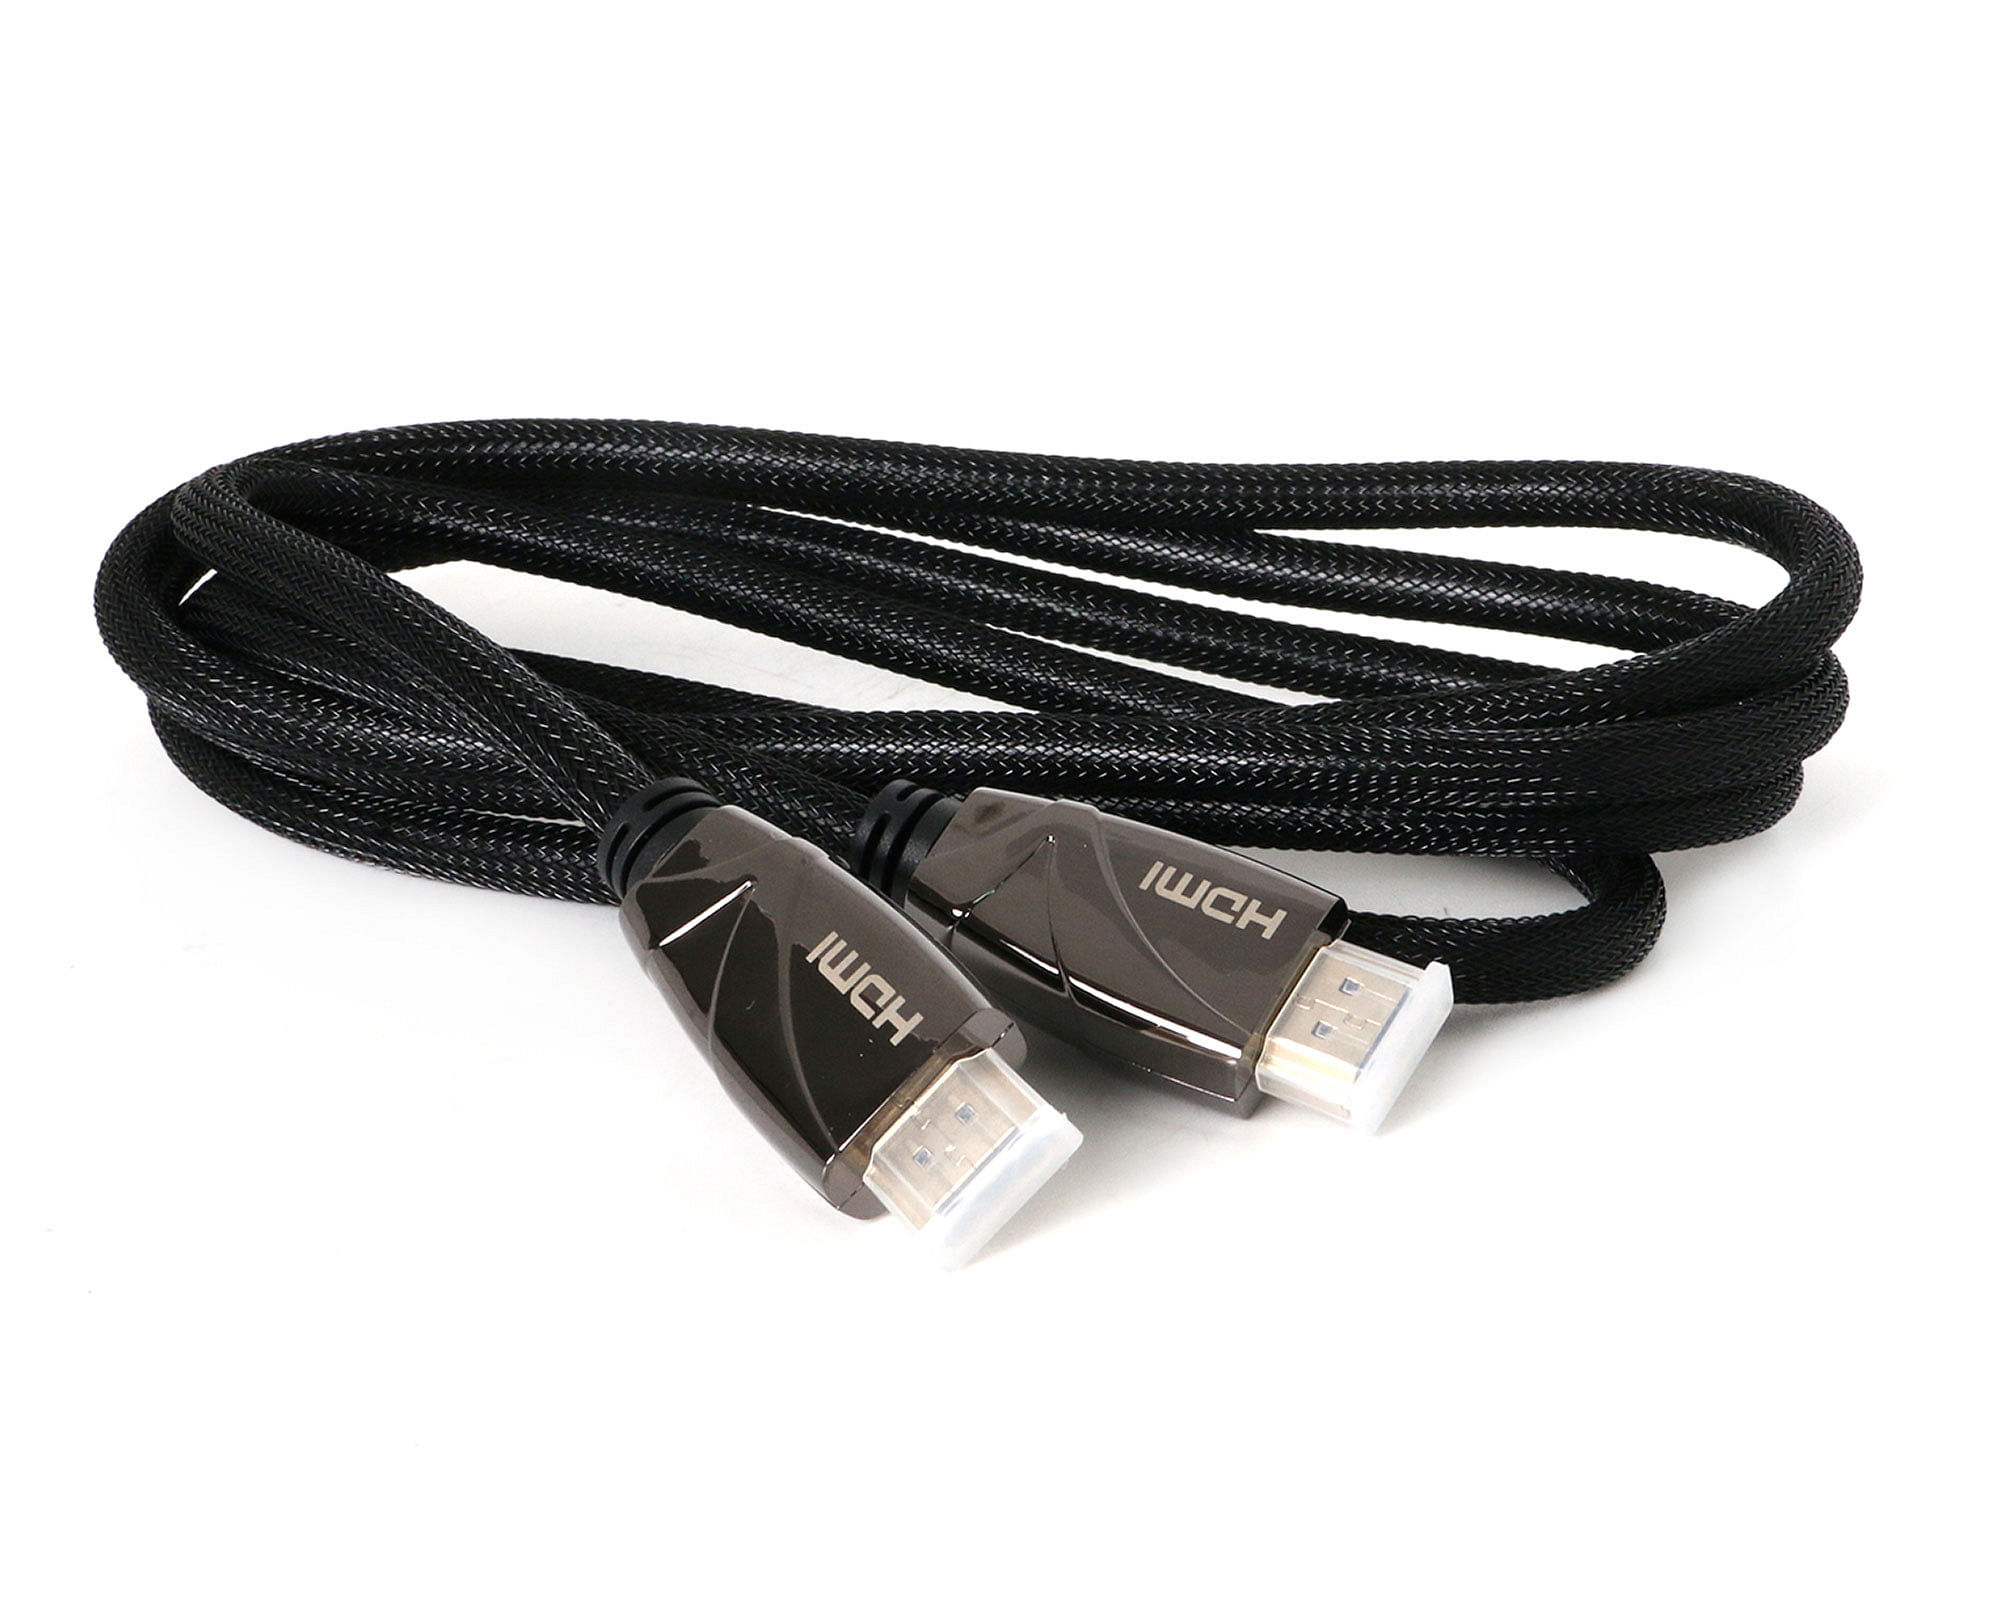 Cable HDMI 5 m Extra largo negro Fiddler